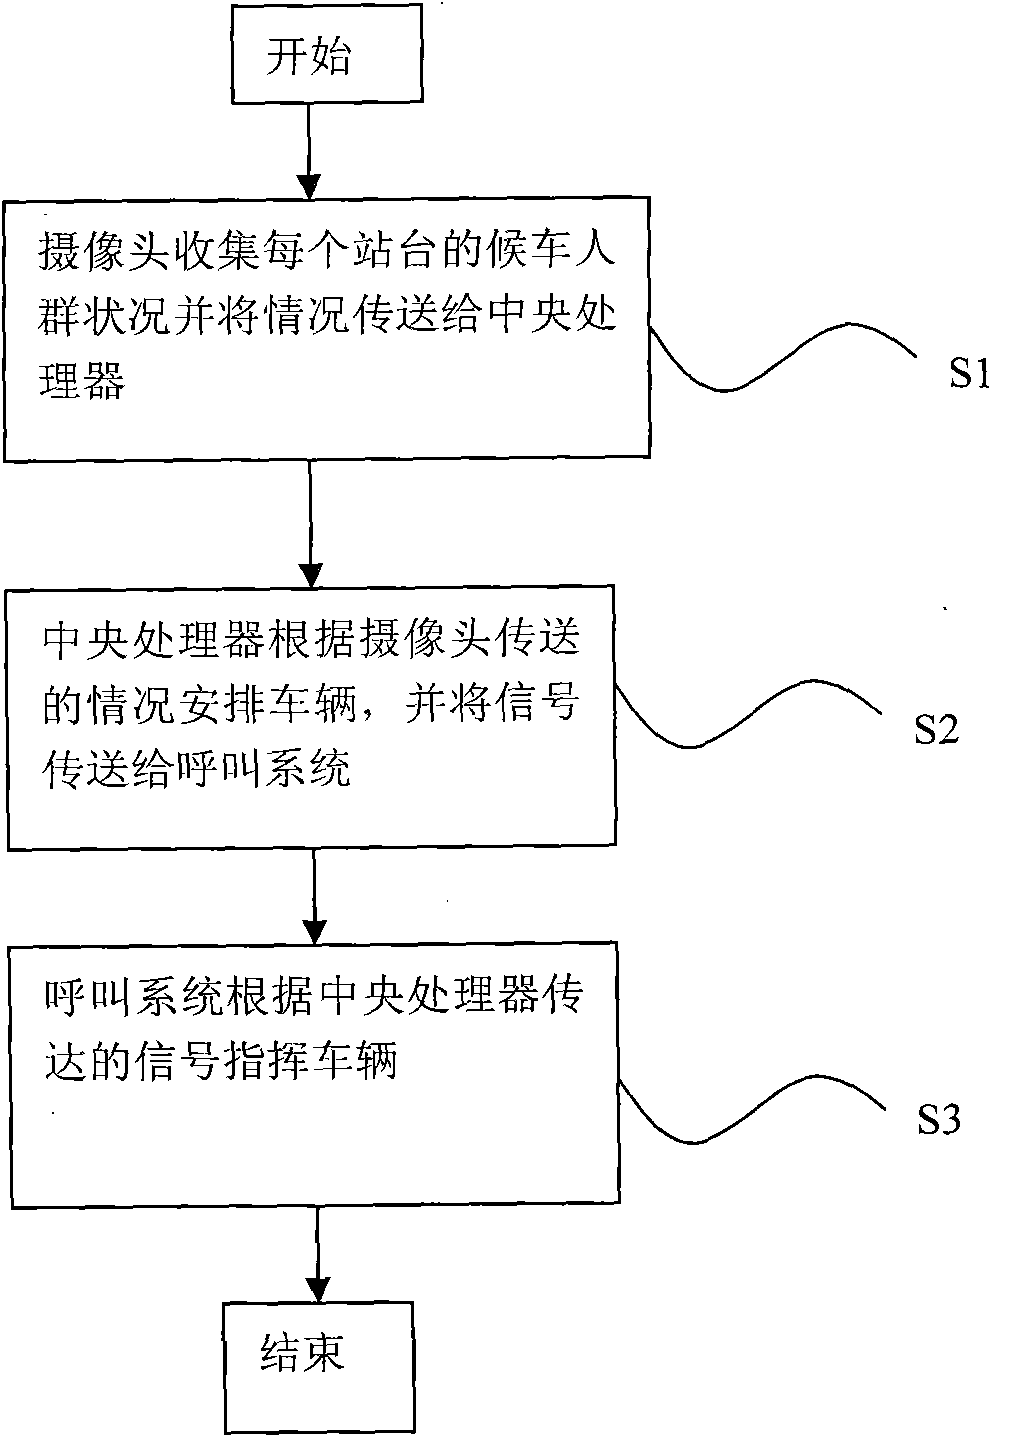 Bus scheduling device and method